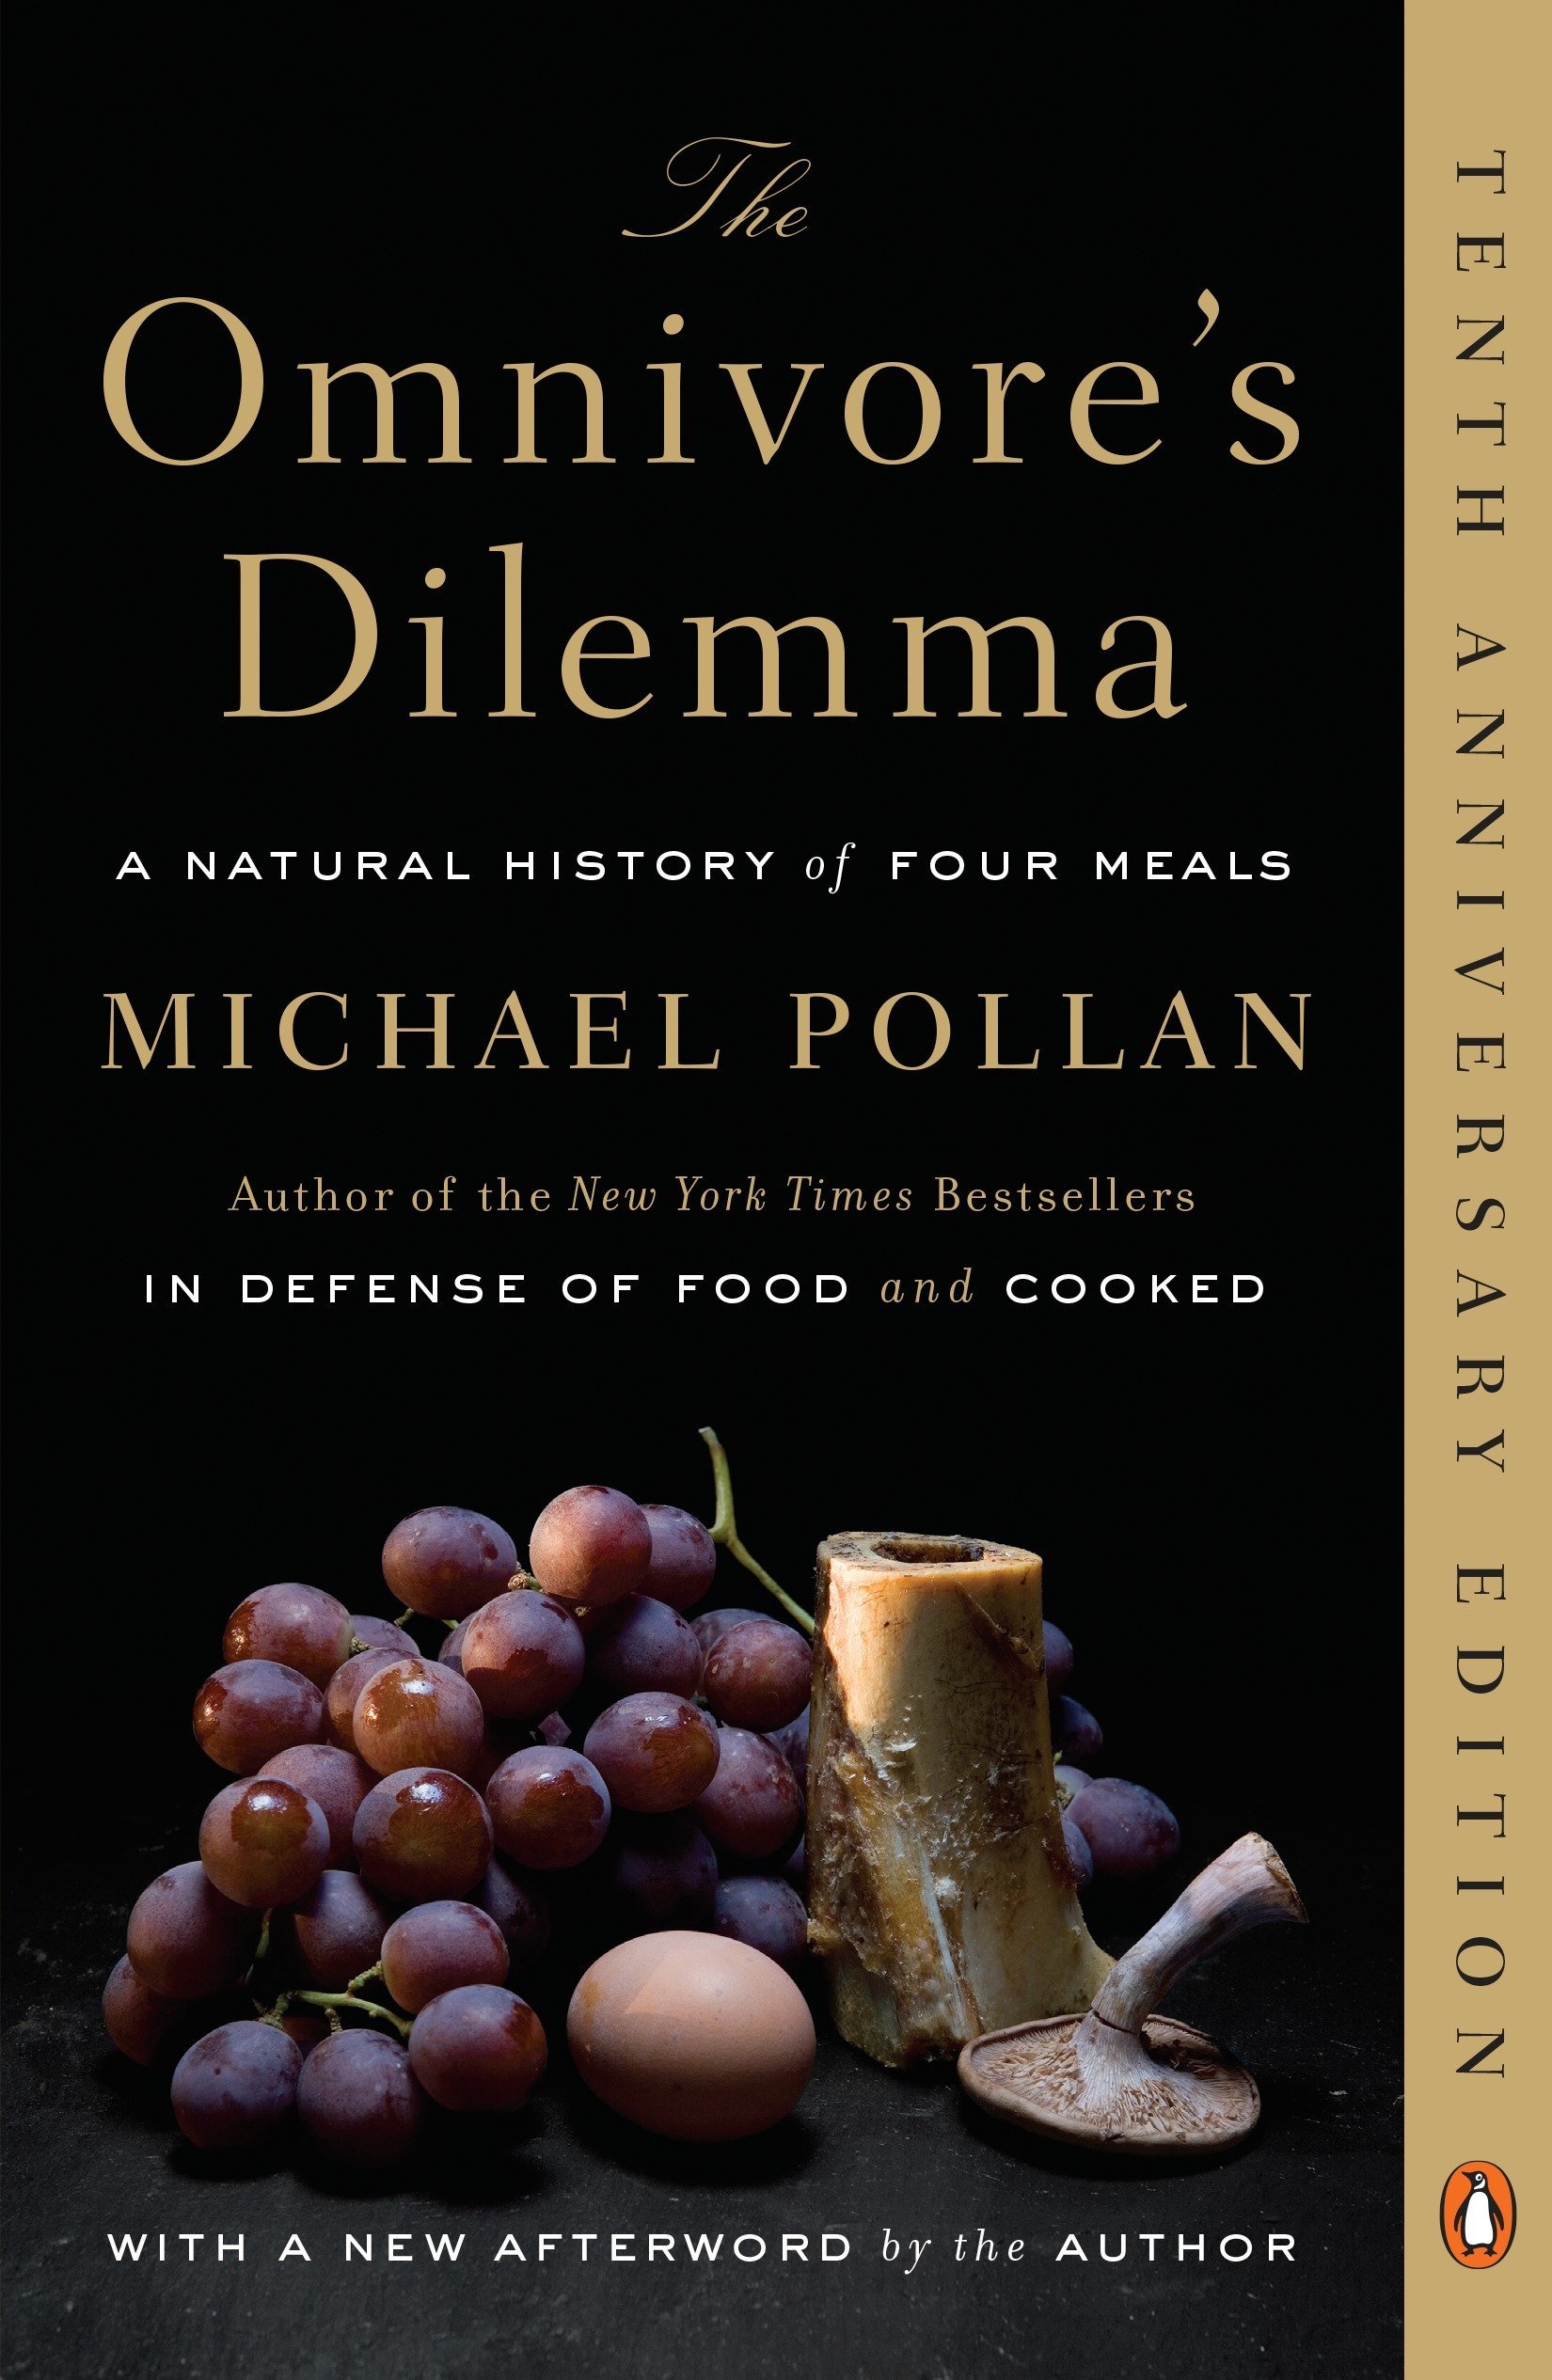 Photo of omnivores dilemma book cover